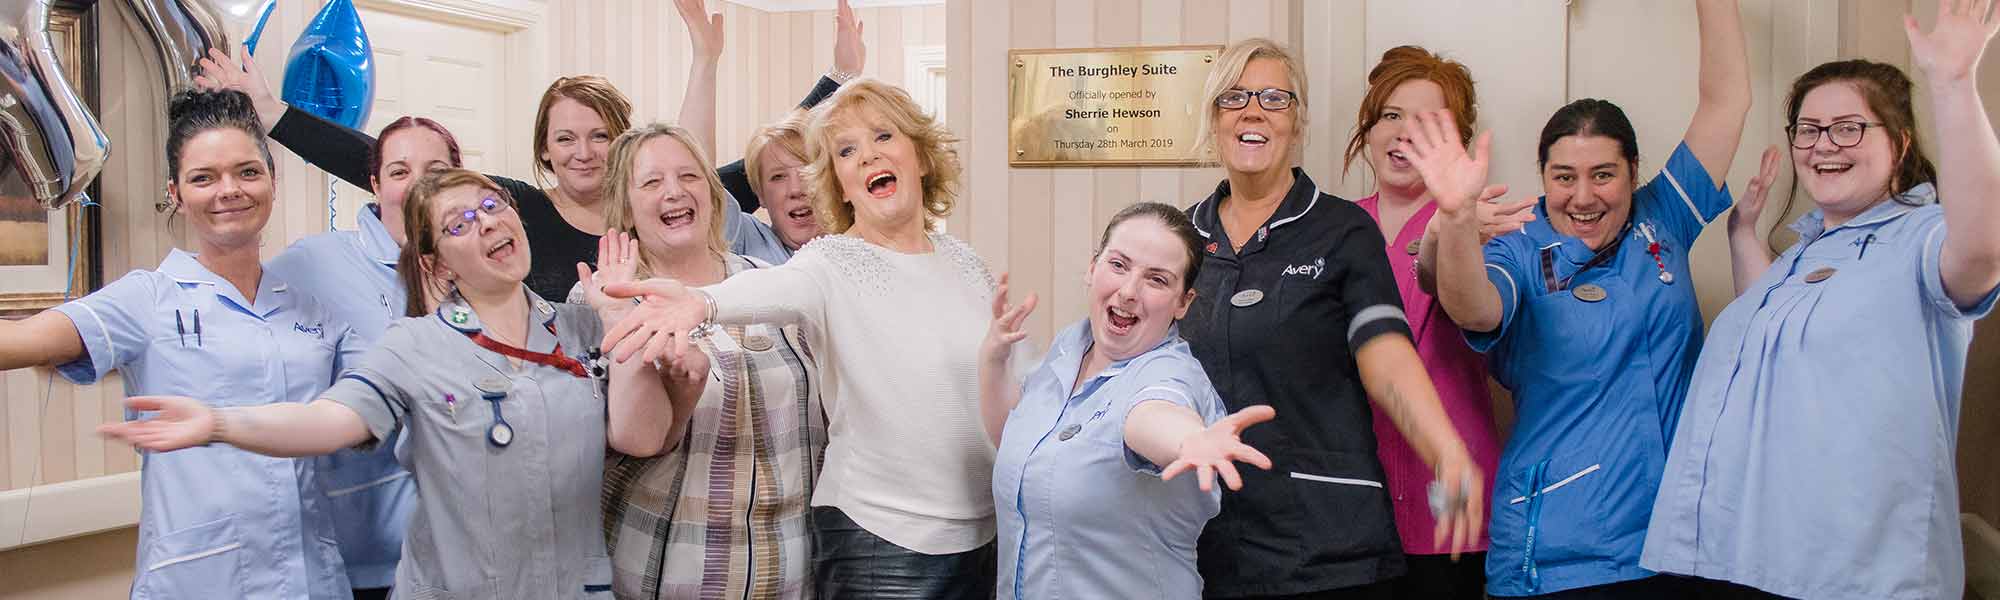 Priory Court Care Home, Dementia Care Burghley Suite Grand Opening Staff Sherrie Hewson banner hero